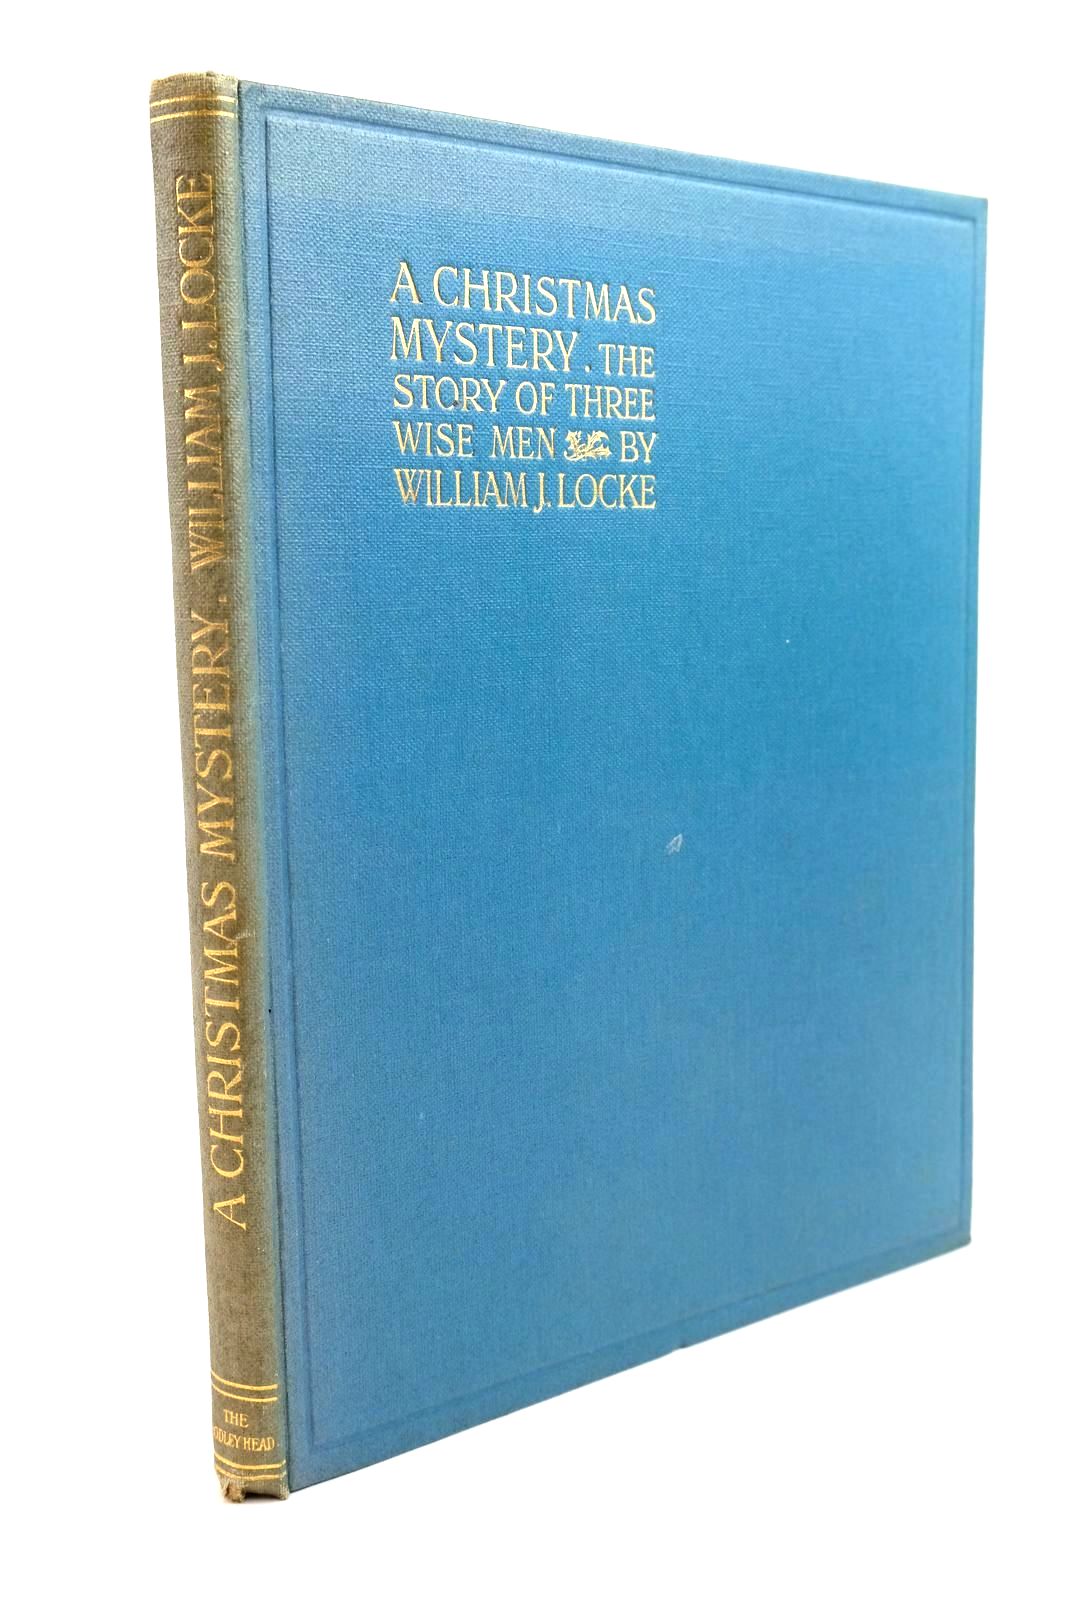 Photo of A CHRISTMAS MYSTERY written by Locke, William J. illustrated by Lendon, W.W. published by John Lane The Bodley Head (STOCK CODE: 1321474)  for sale by Stella & Rose's Books